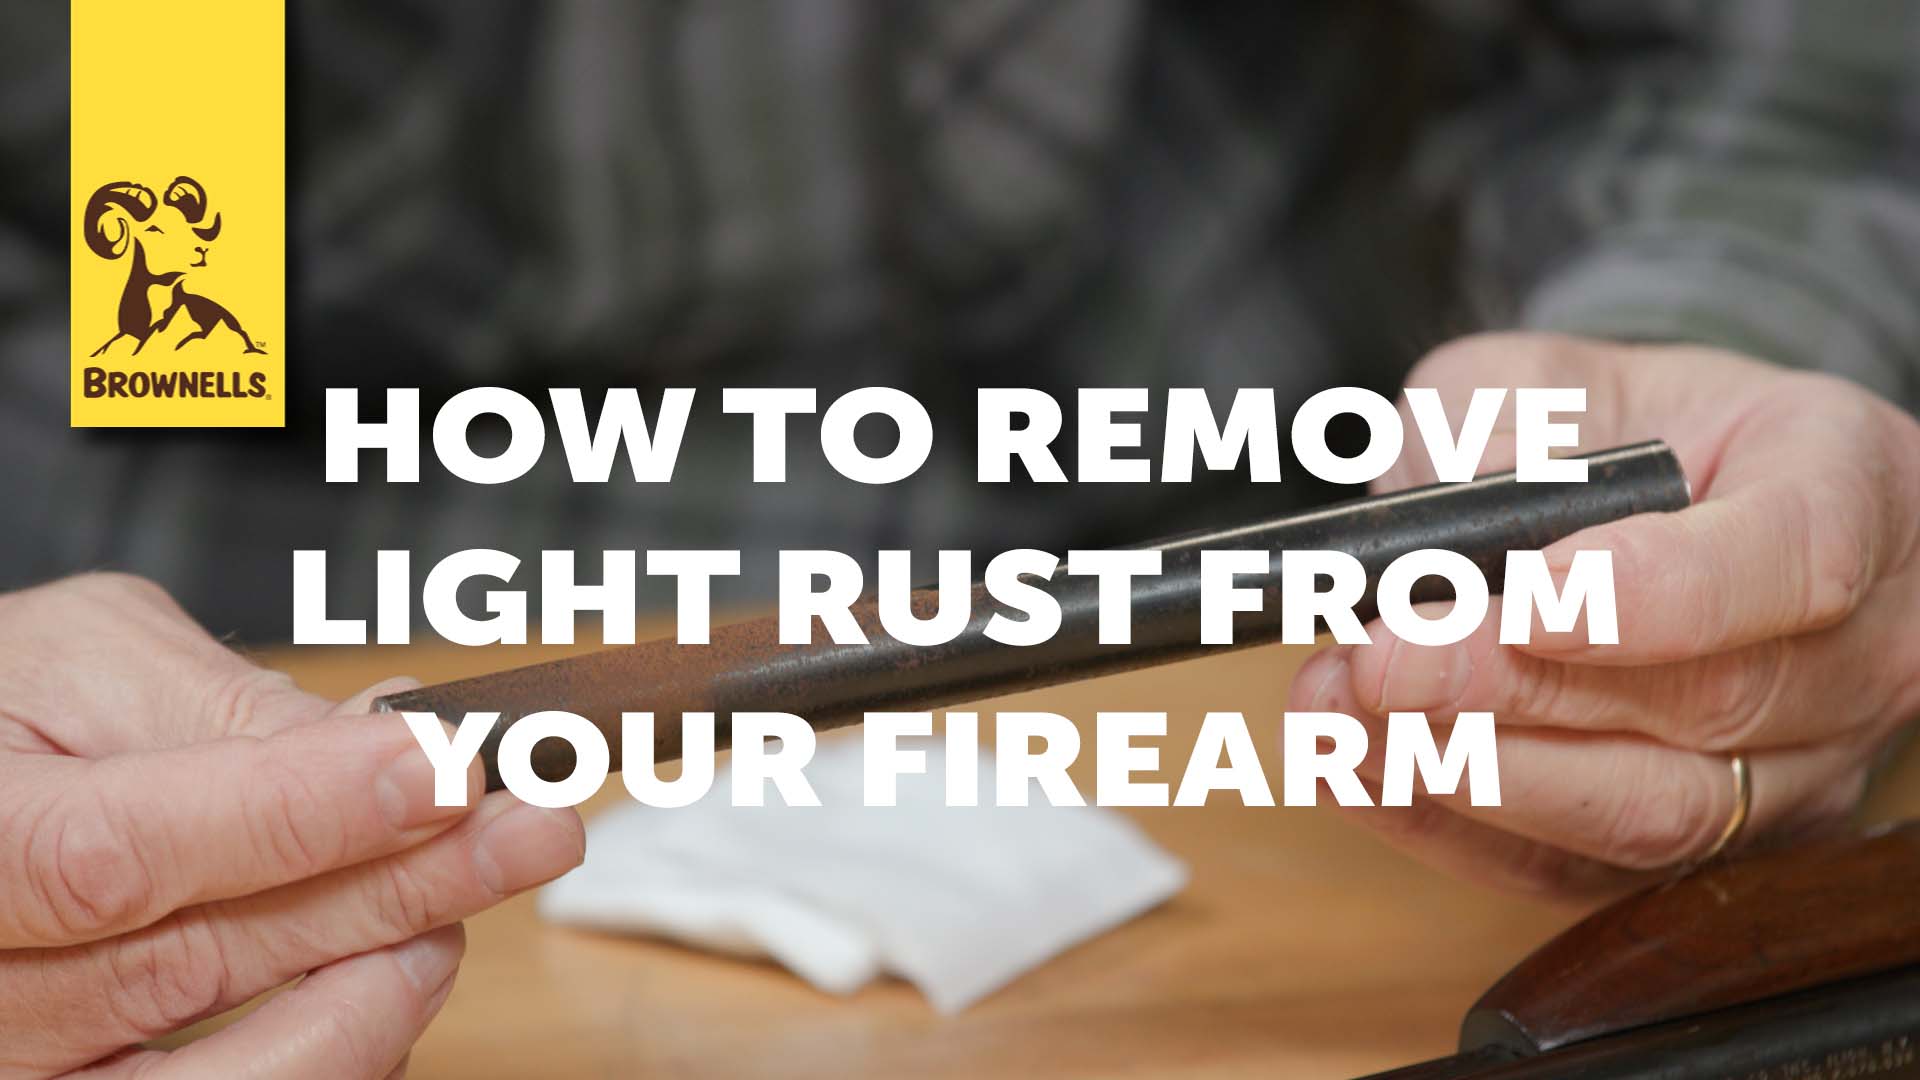 0199-23 Quick Tip - How To Remove Light Rust From Your Firearm_Thumb